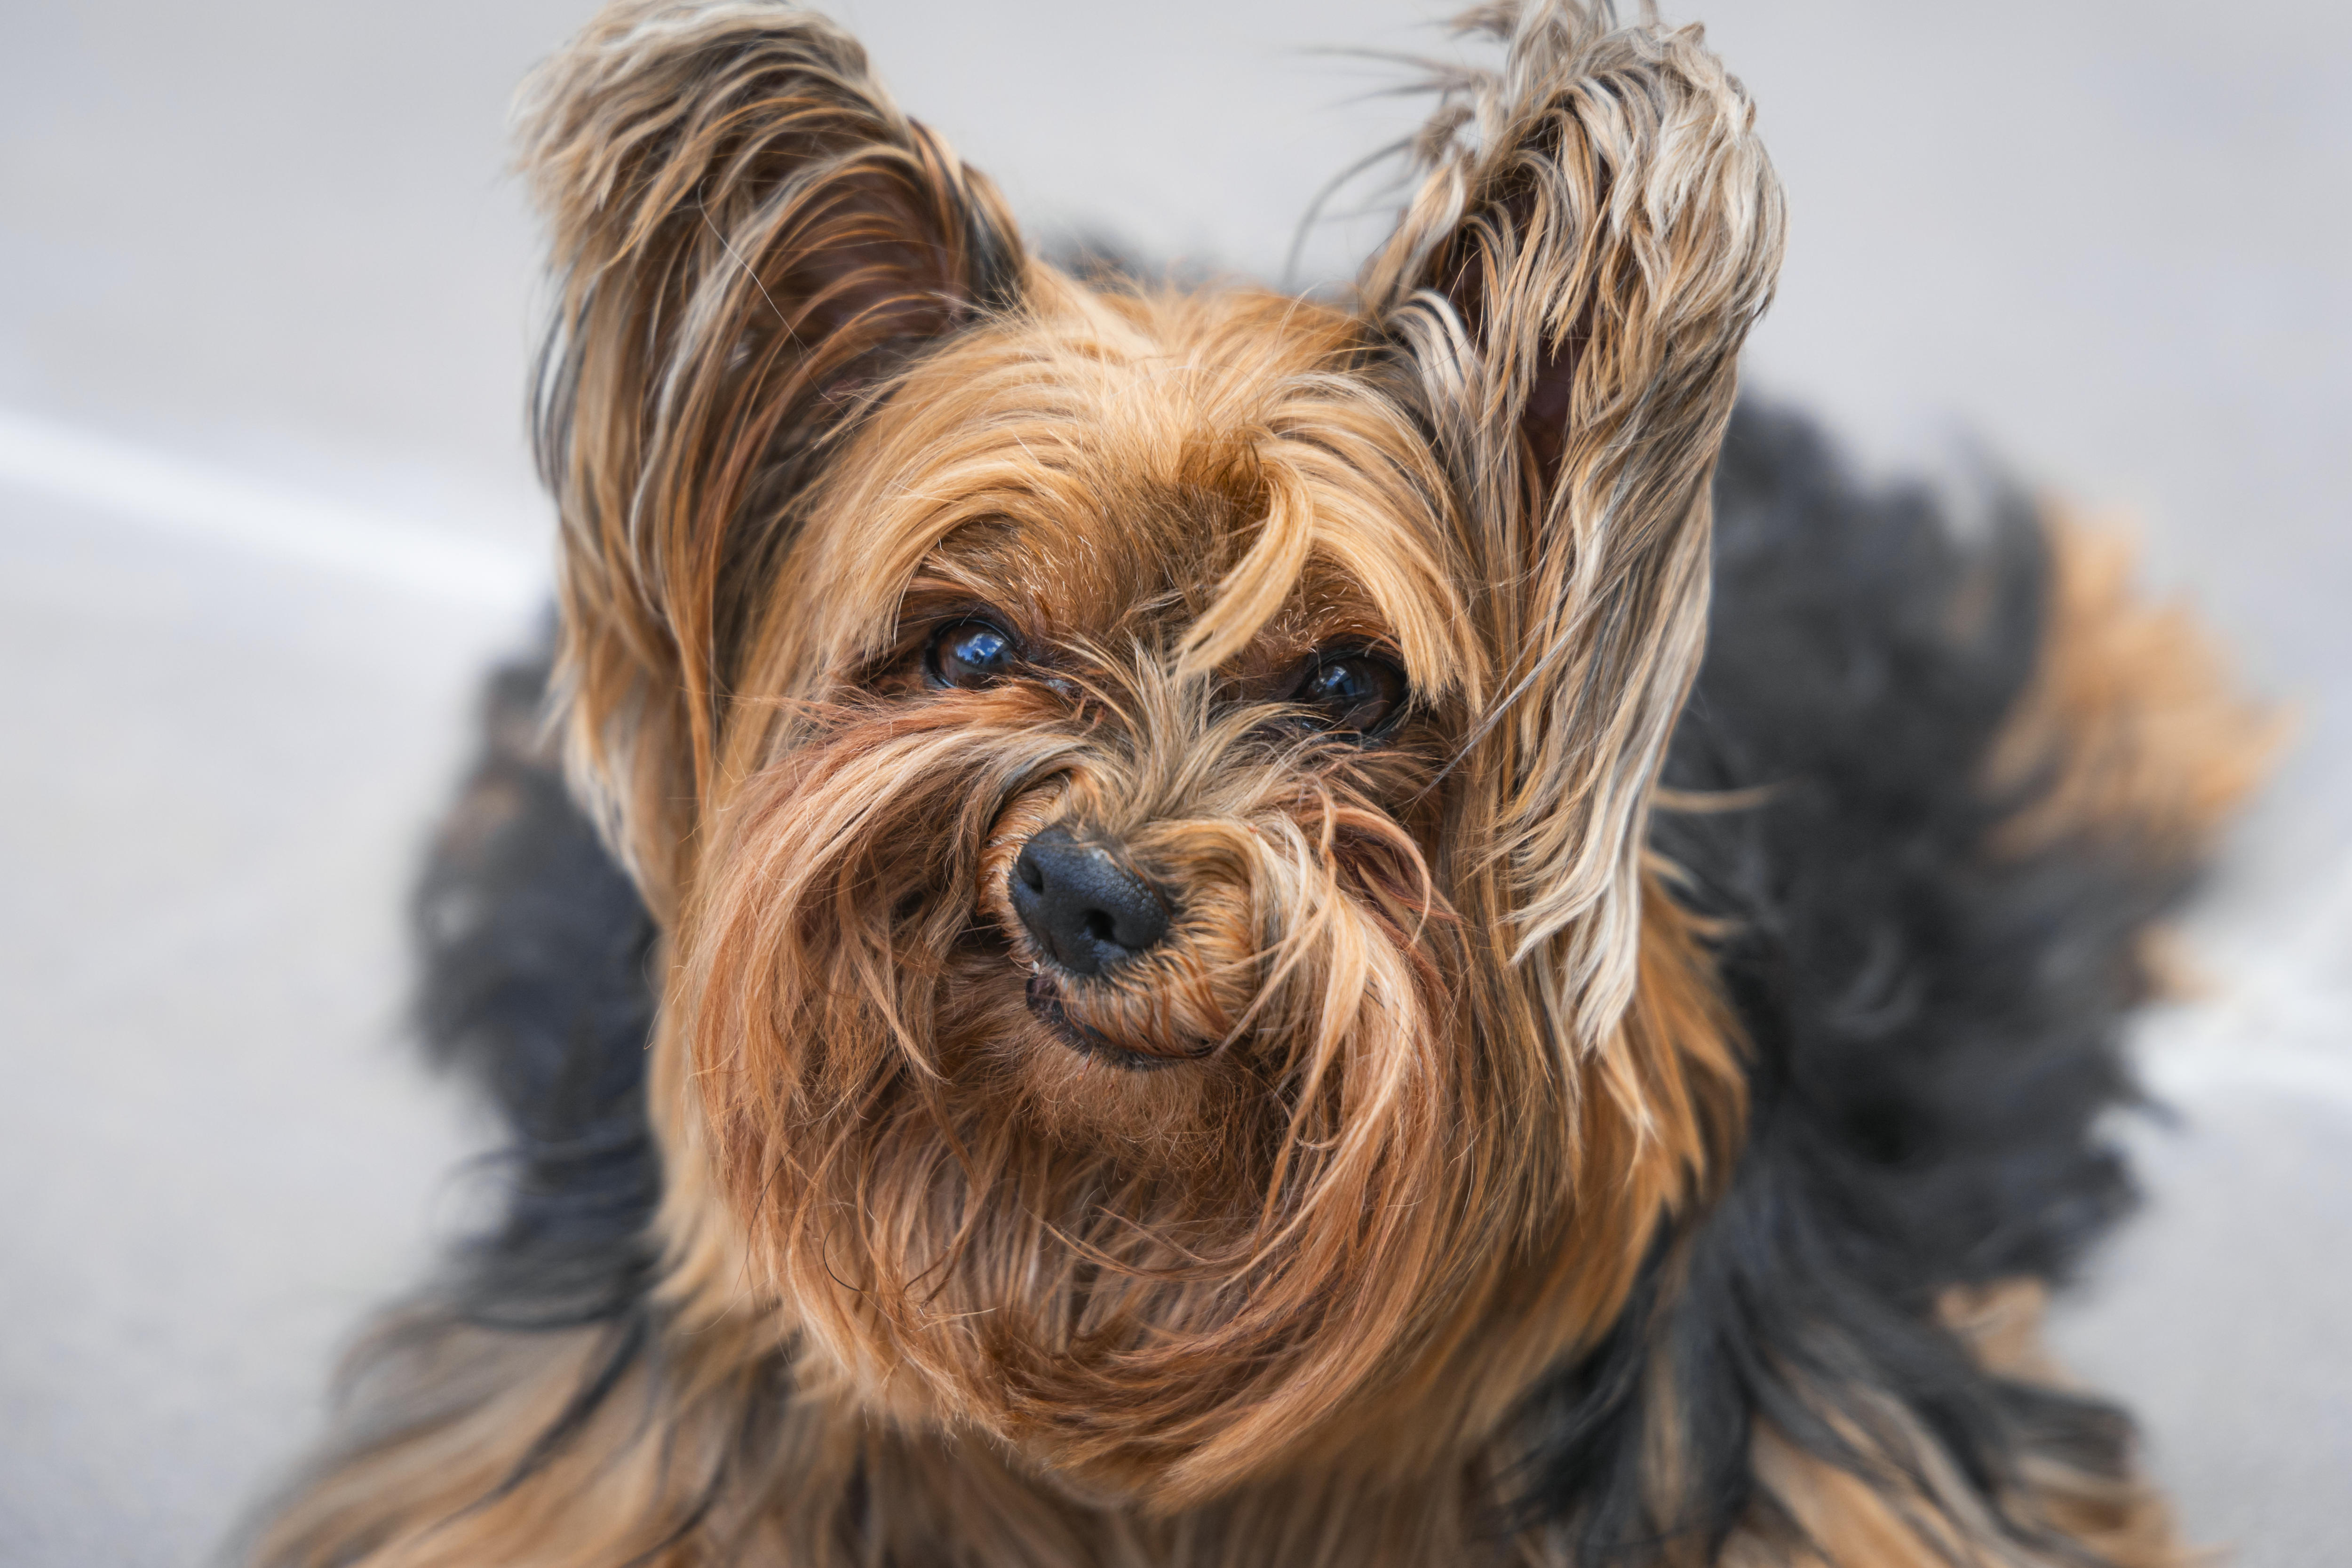 A yorkie that looks unhappy